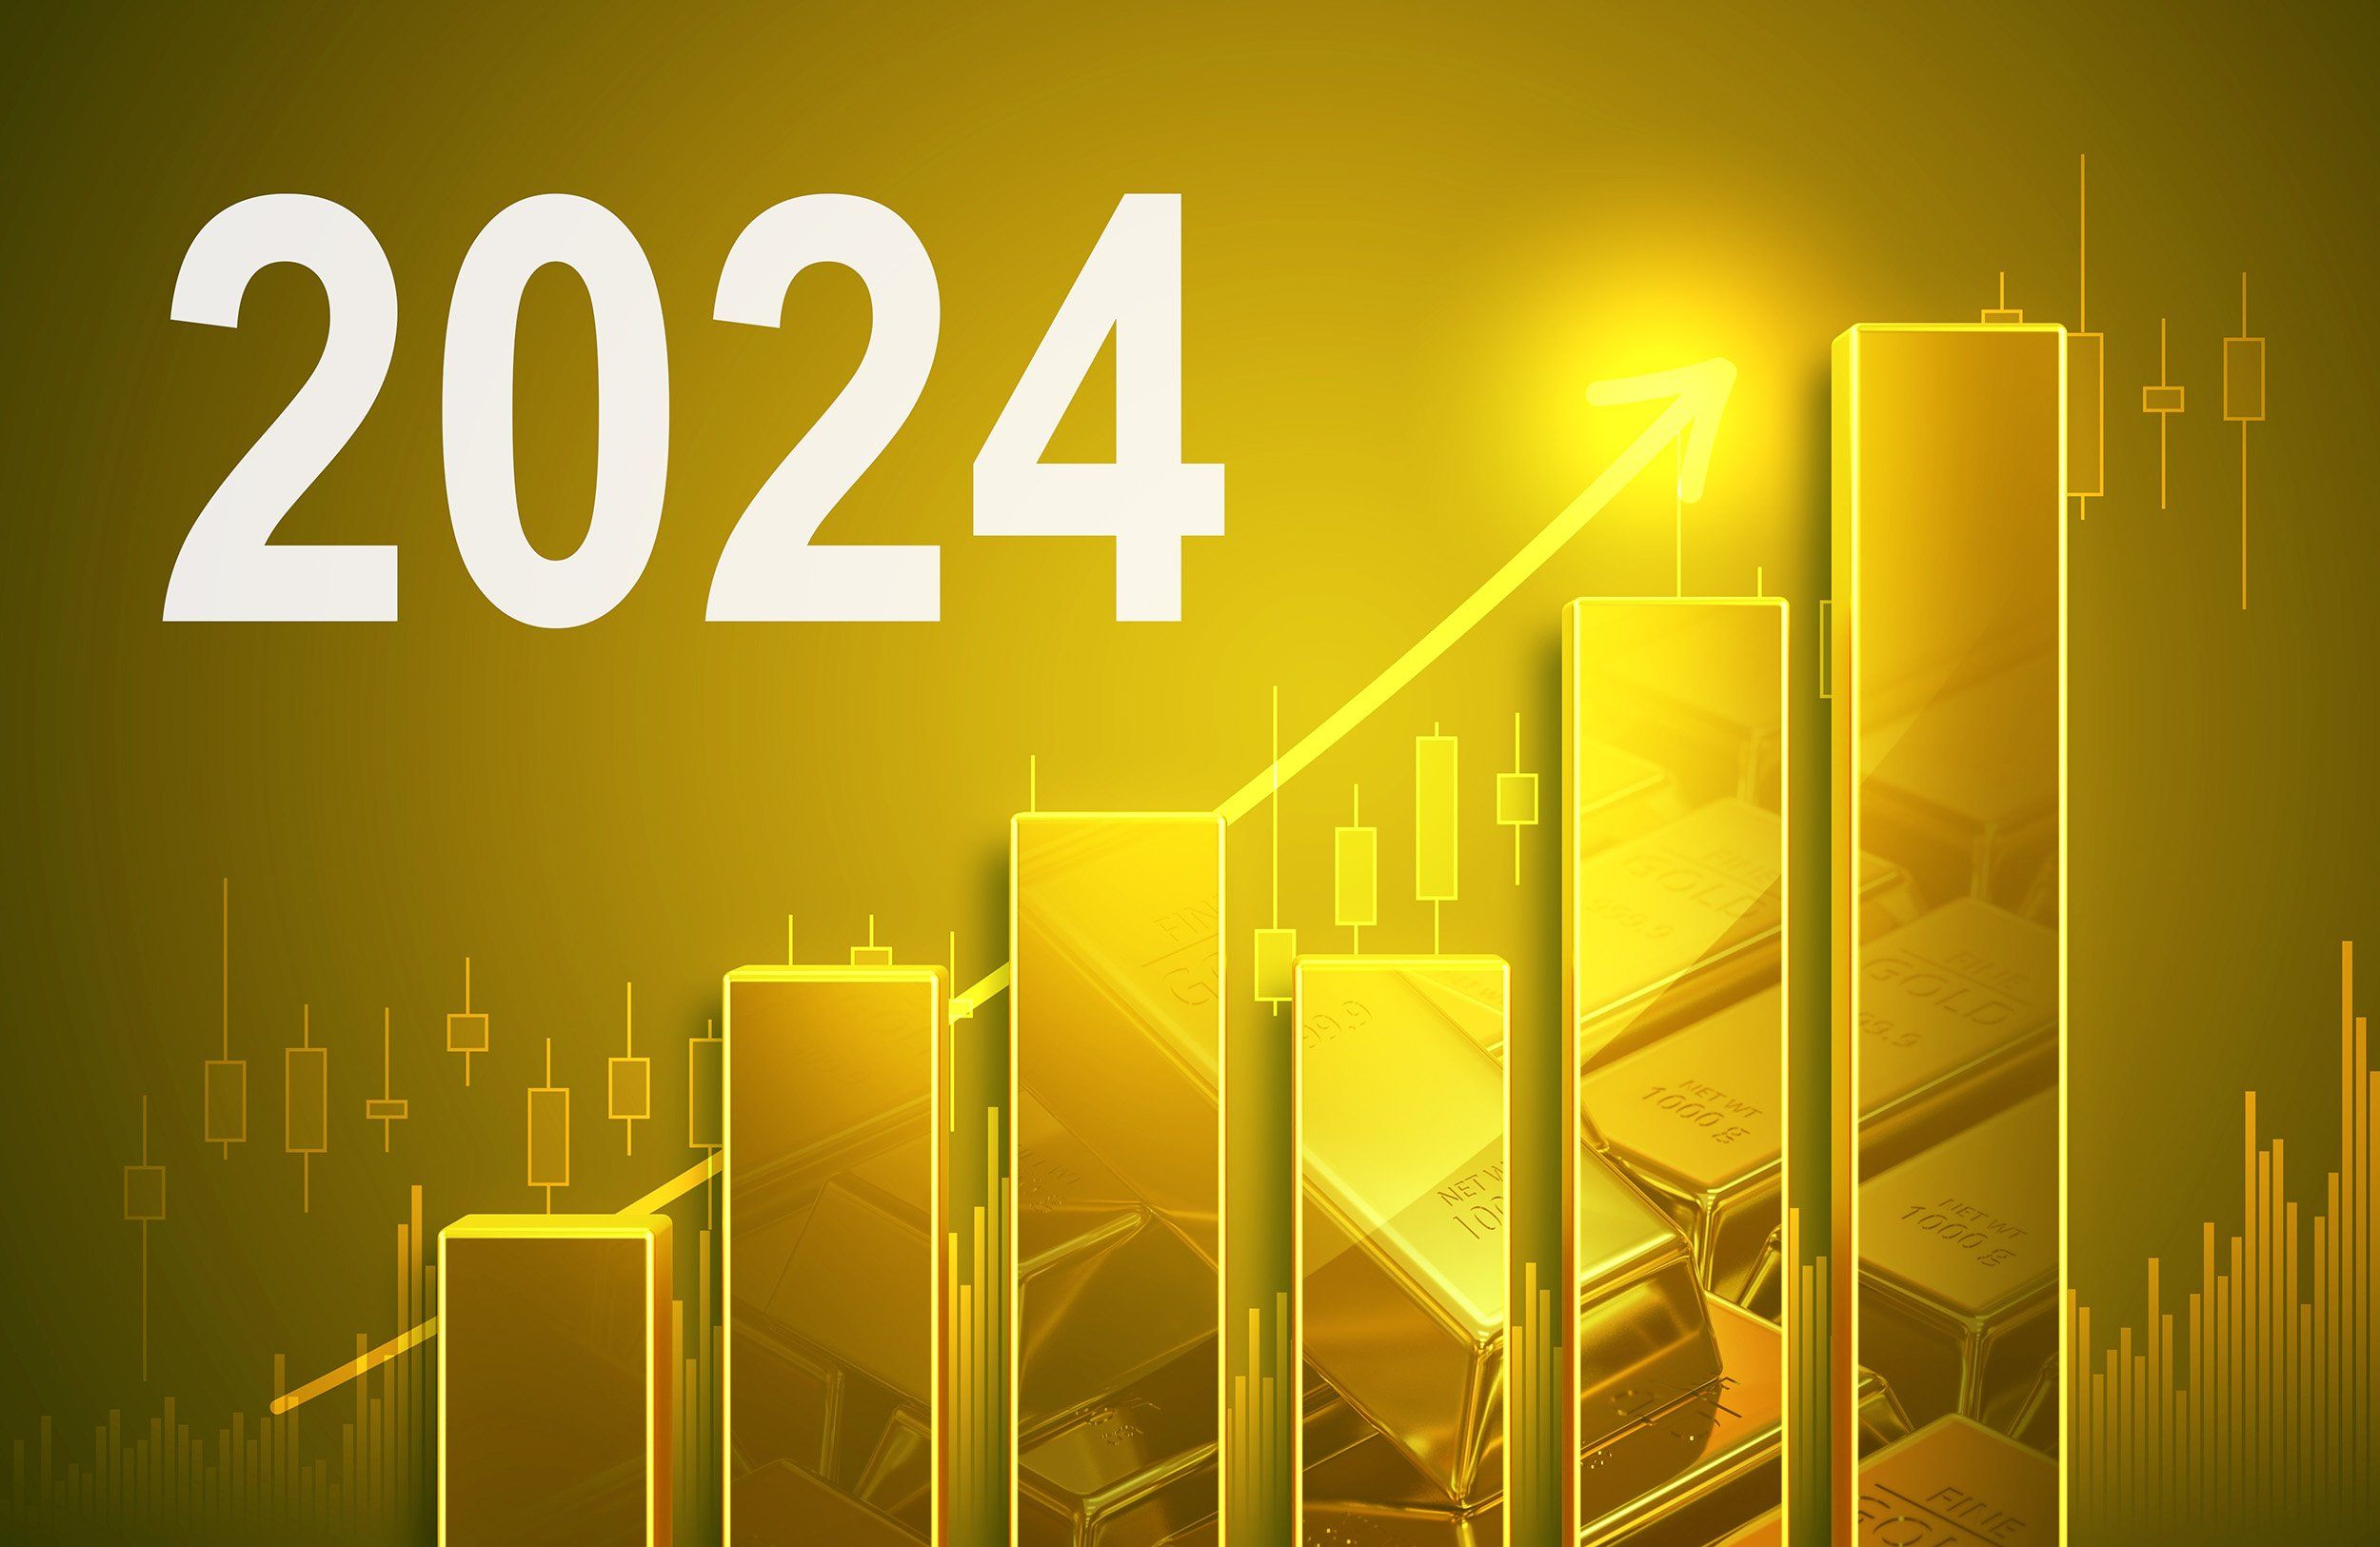 Gold bar chart with "2024" overlay. 